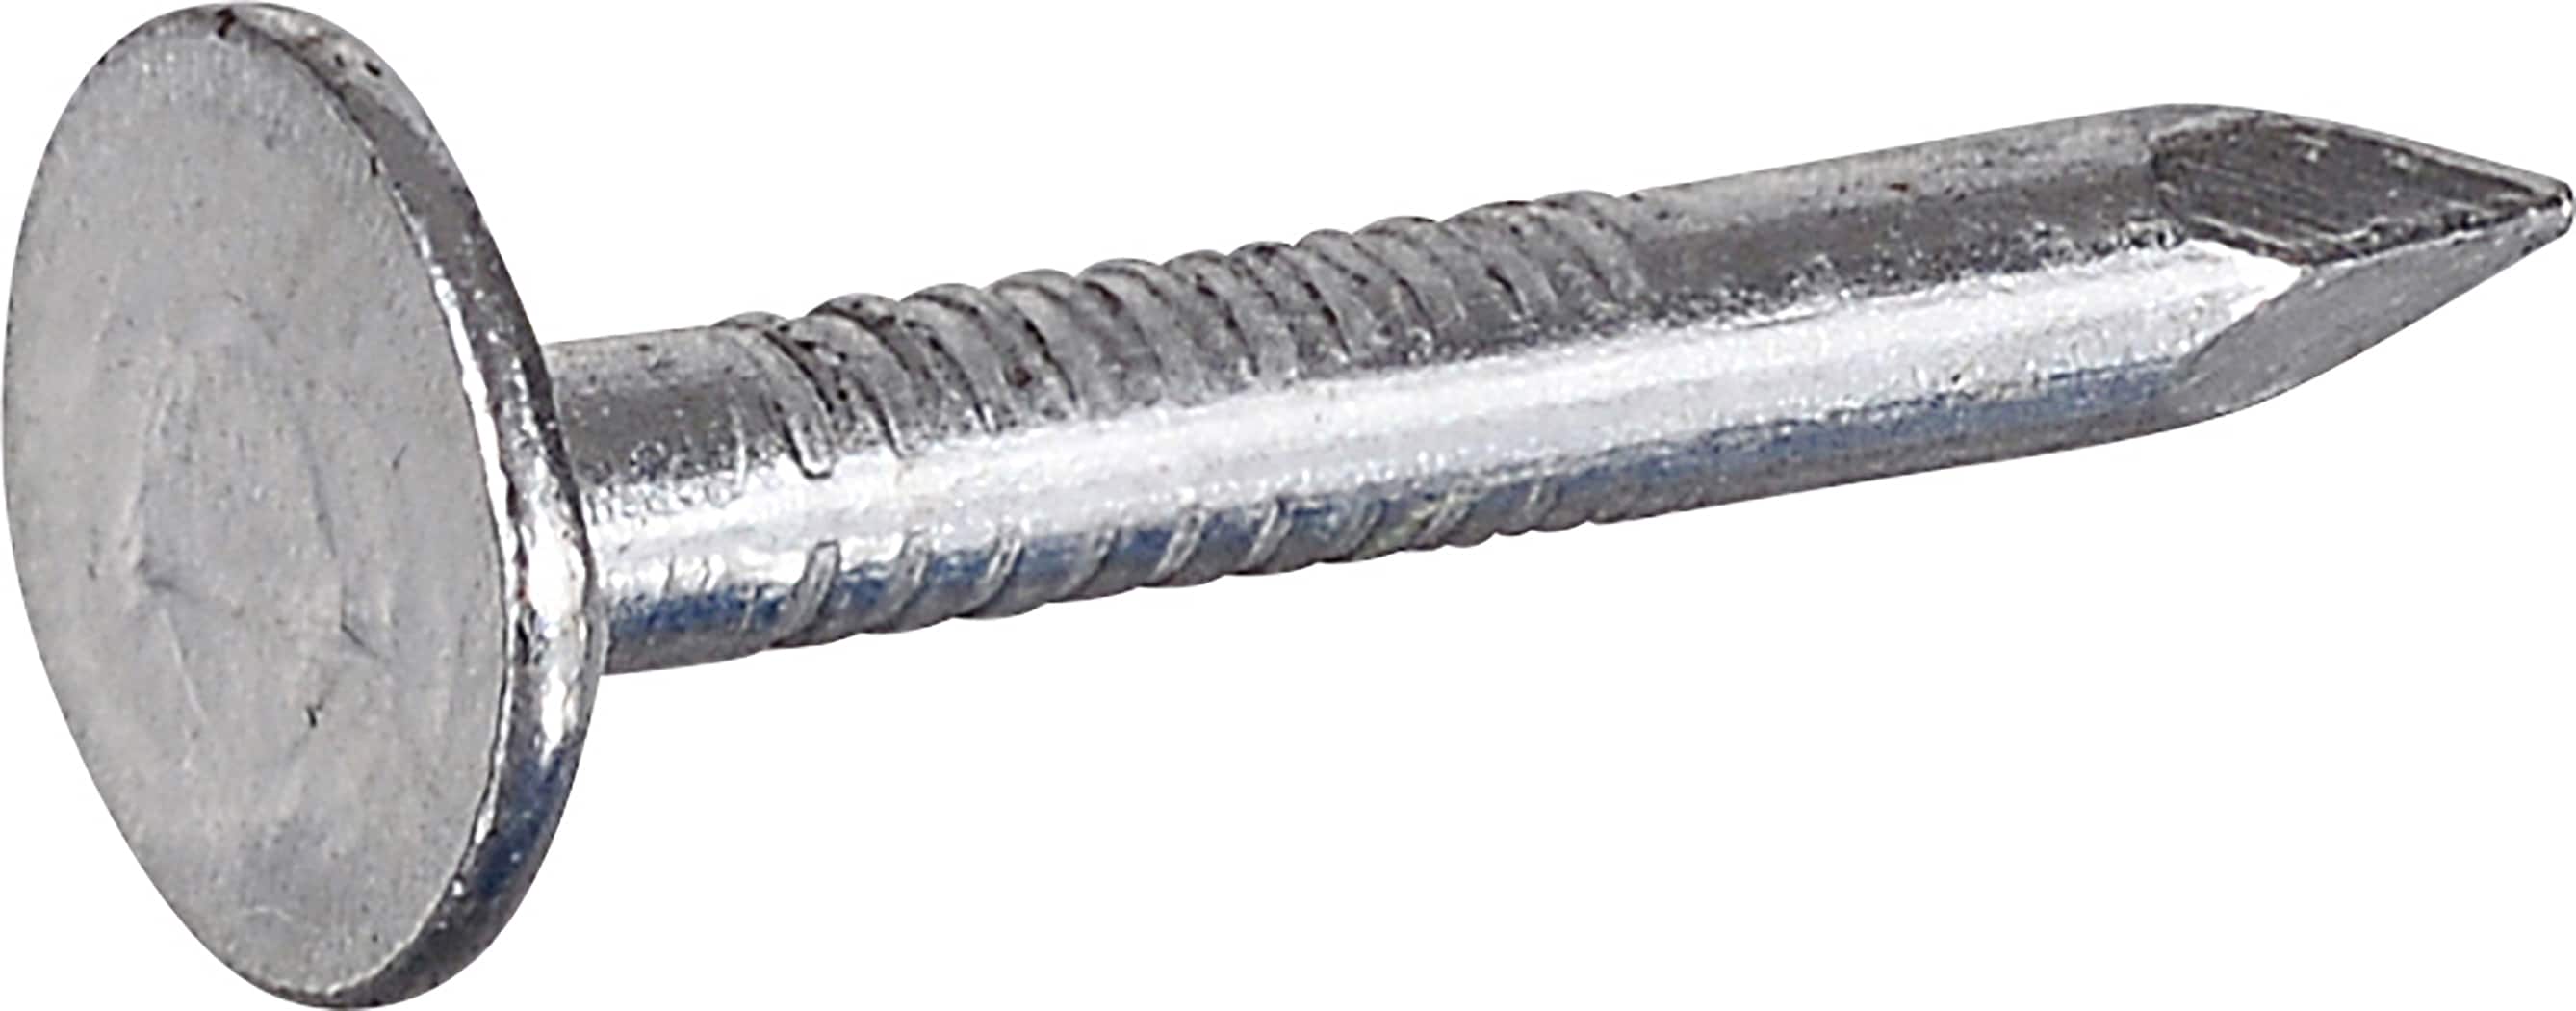 20 X 2.8mm As2334-1980 Australia Galvanised Clout Nails in 30lb Plastic  Tube - China Galvanised Clout Nails, Australia Galvanised Clout Nails |  Made-in-China.com